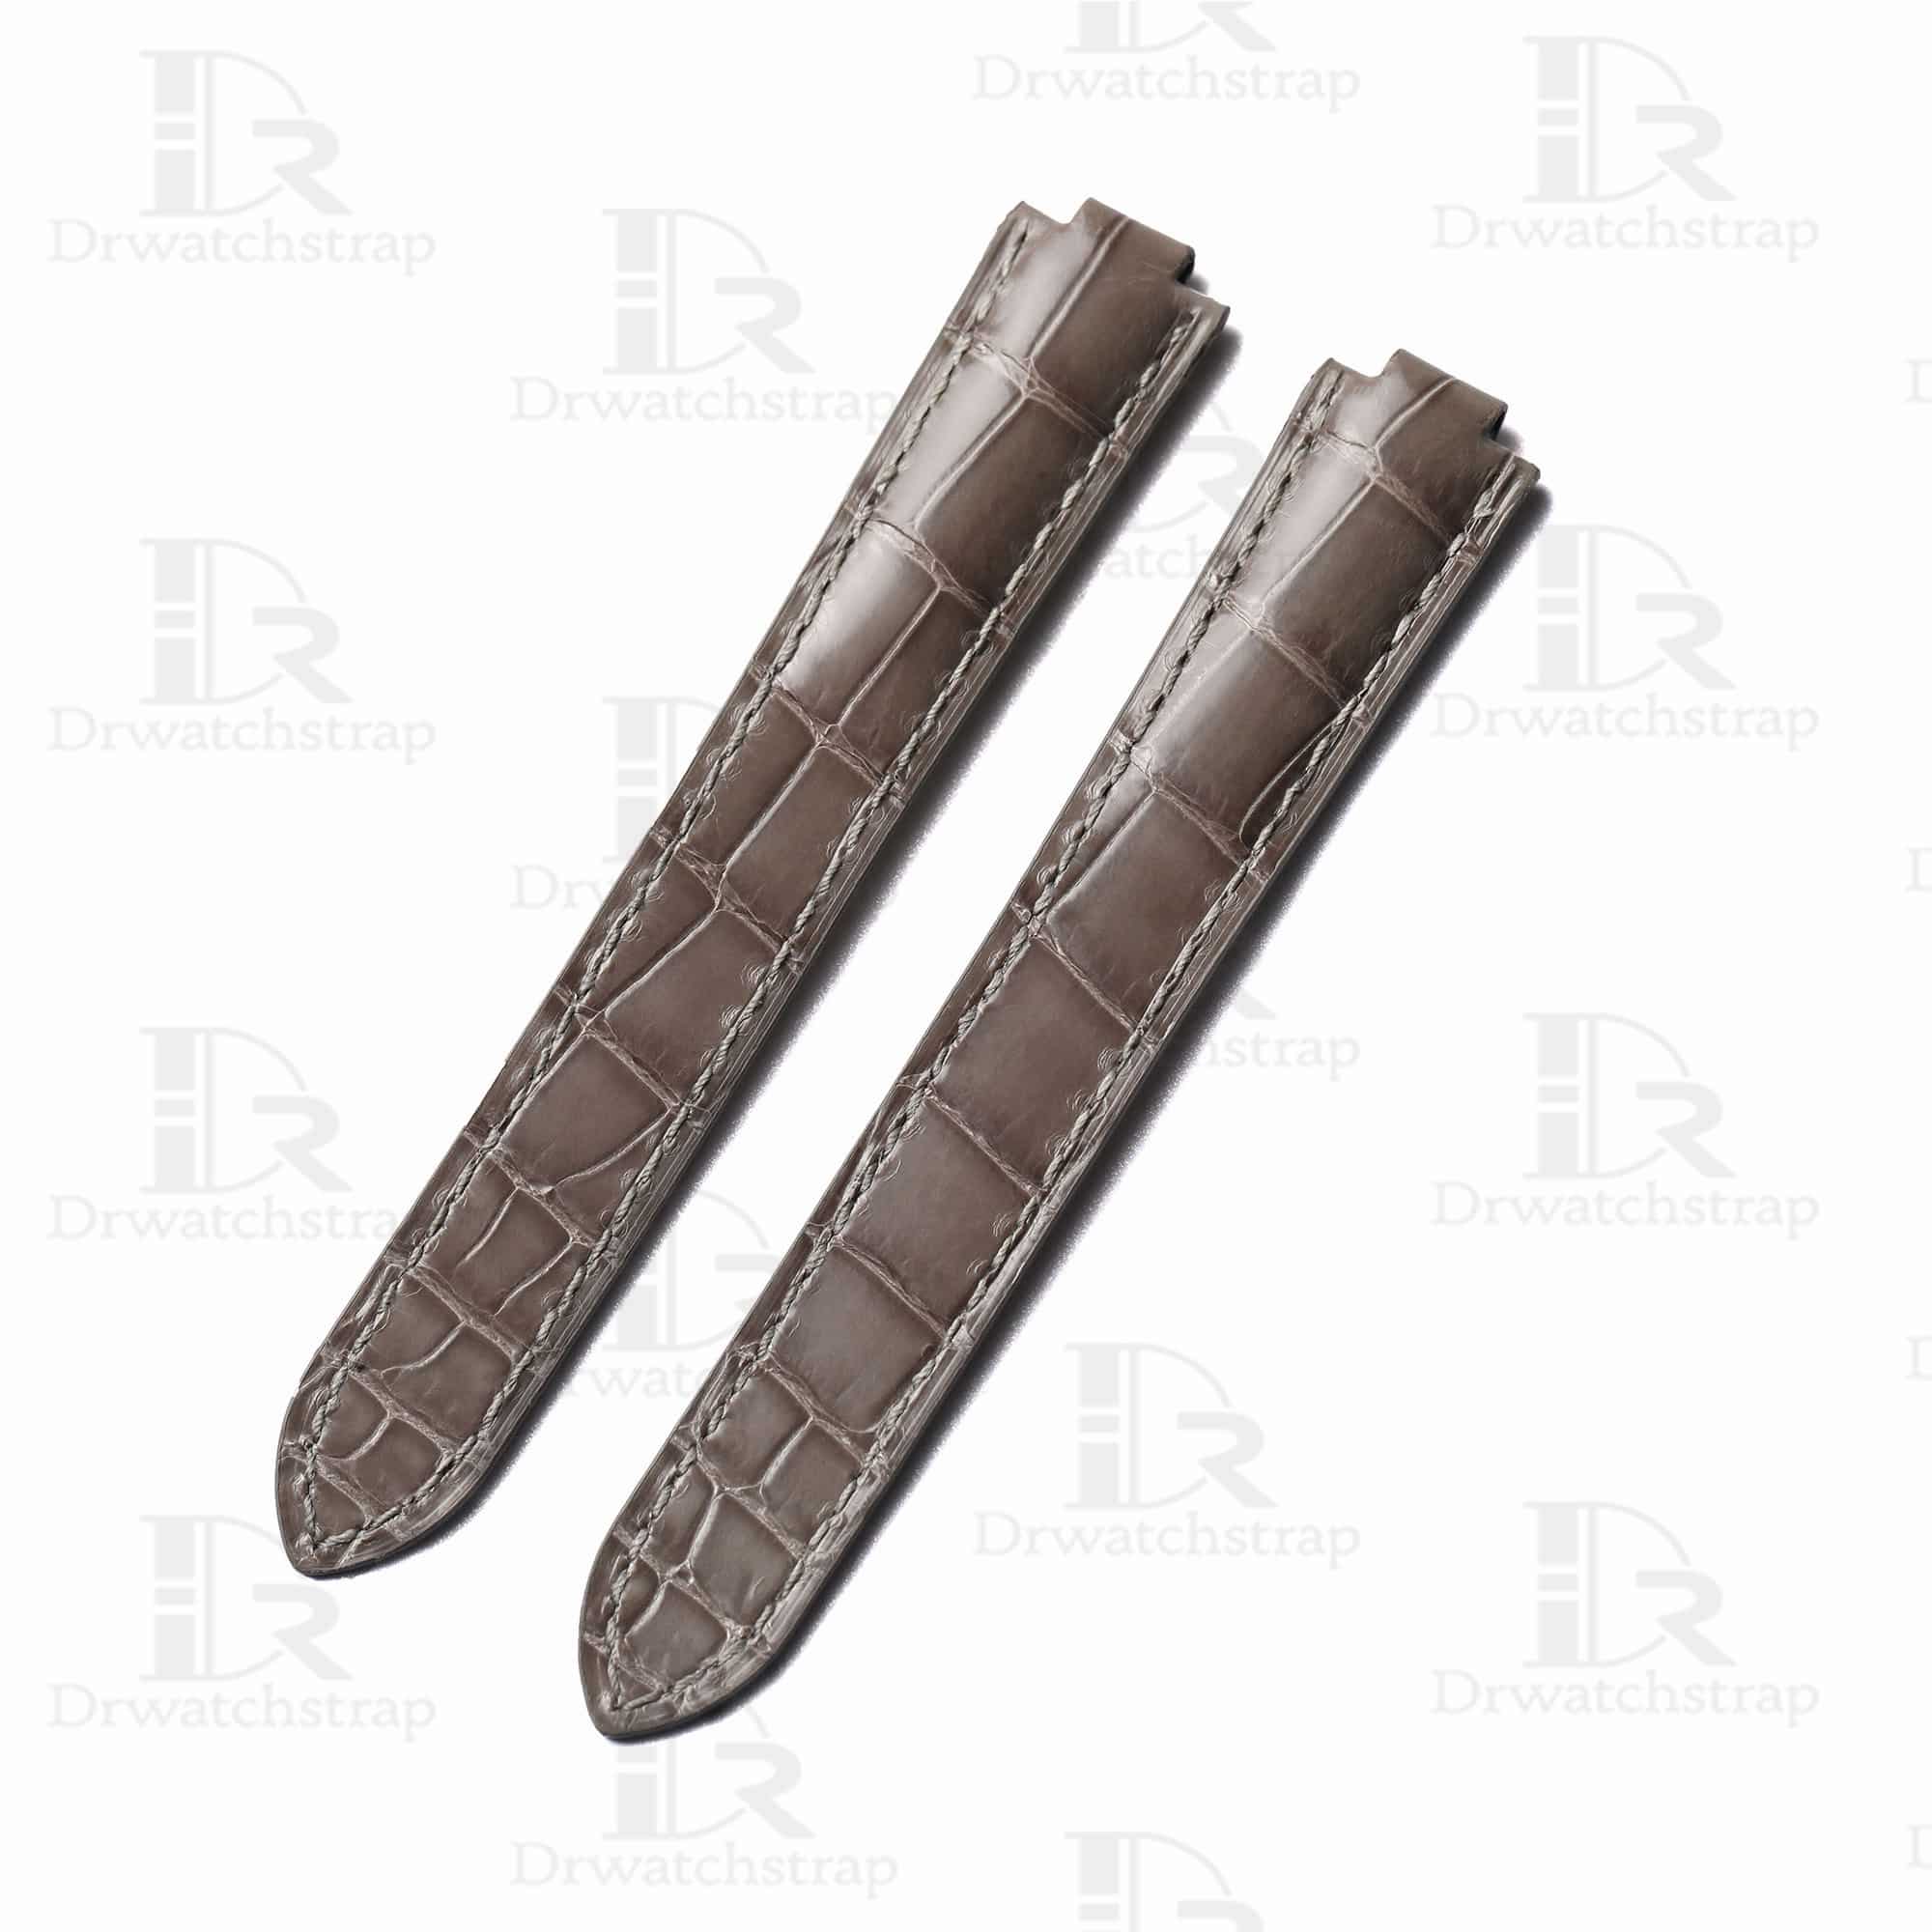 Genuine best quality OEM custom American Alligator grey Belly-scale replacement Cartier Ballon Bleu de watch leather strap & watch band with pin buckle from dr watchstrap for Cartier de Ballon Bleu watches online - Shop the high-end watch straps & watchbands at a low price